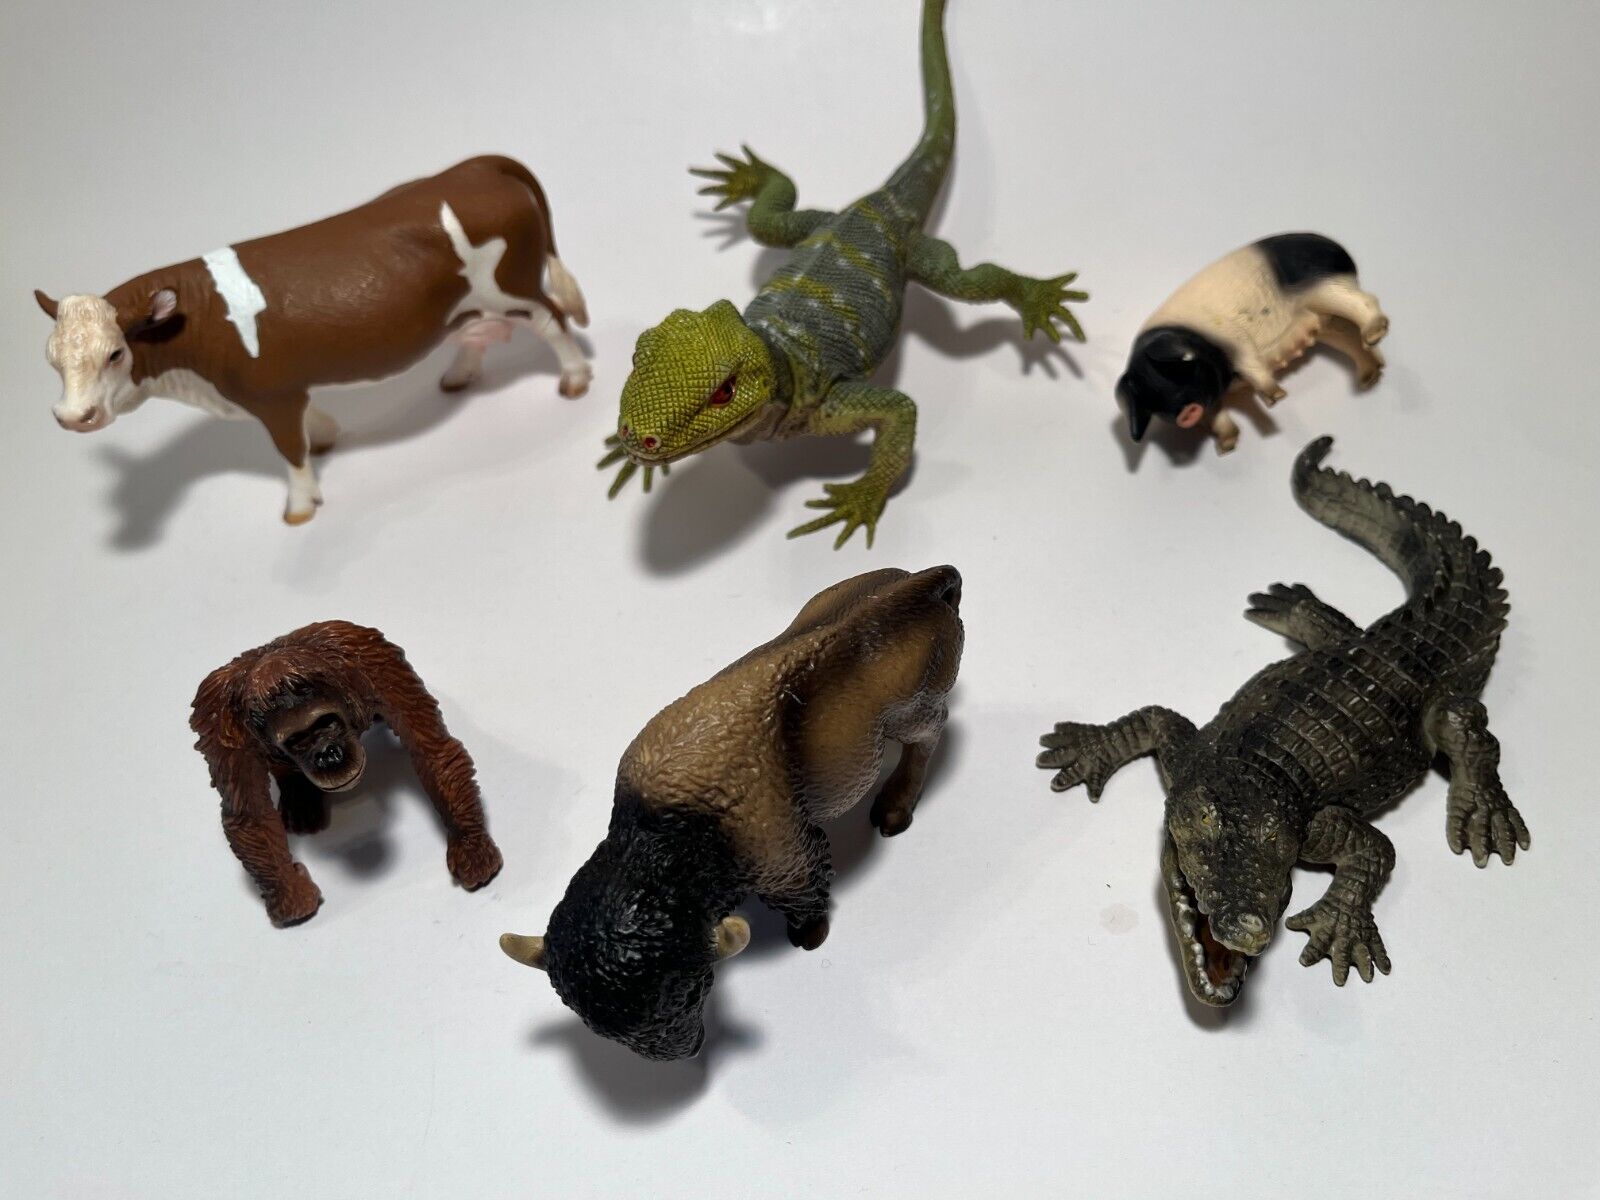 Schleich Germany, TOYSMITH High Quality Realistic Artwork Animals Collection Schleich Germany, TOYSMITH Schleich Germany